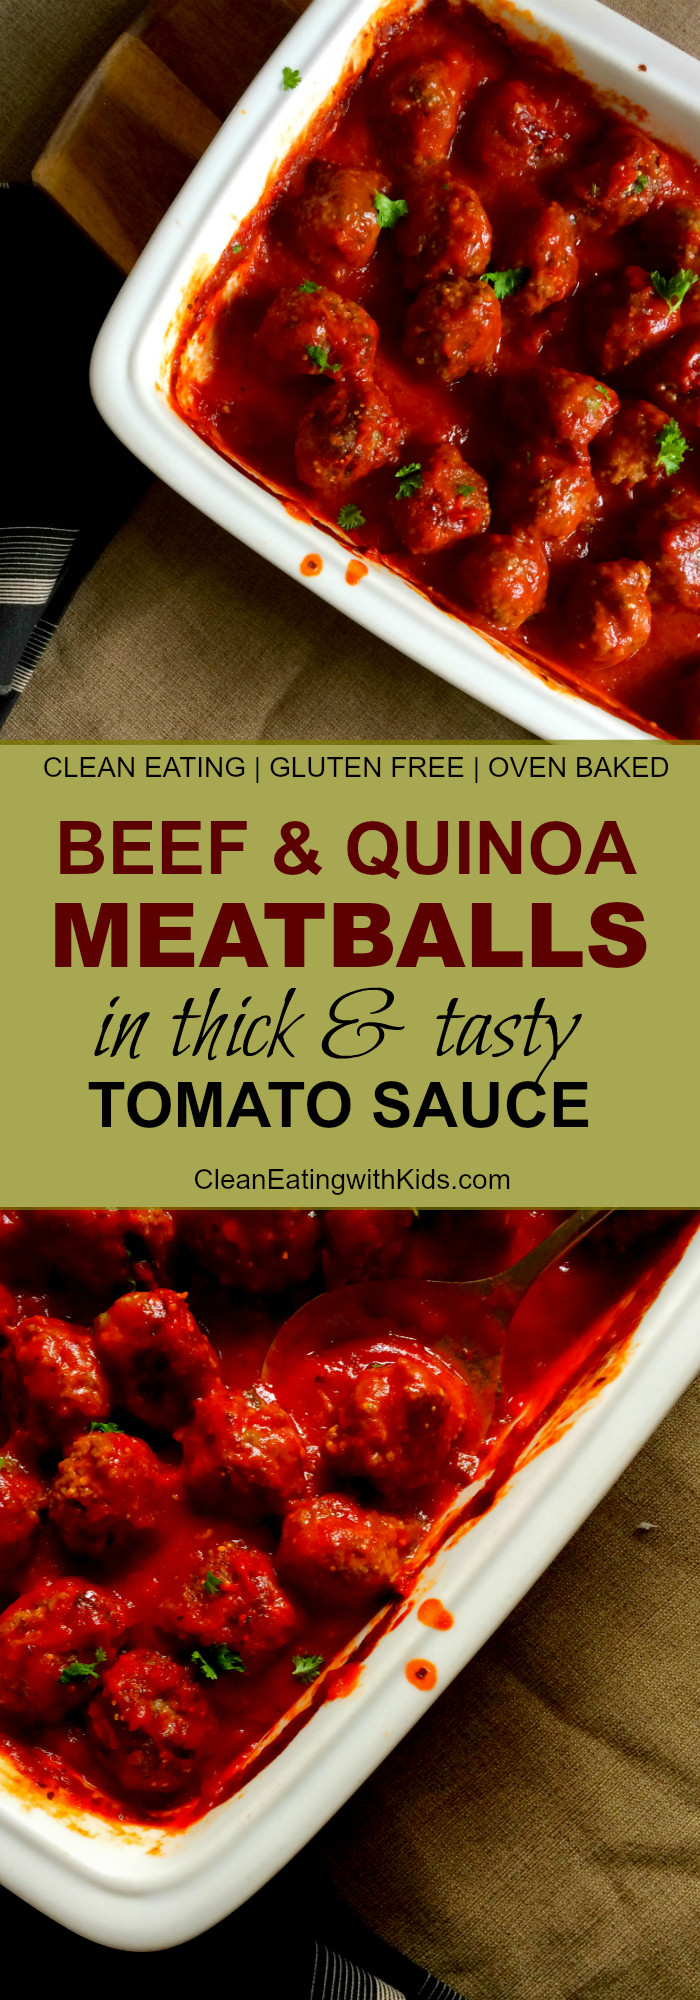 Clean Eating Meatballs
 Cheats Beef and Quinoa Meatballs in tomato sauce Clean